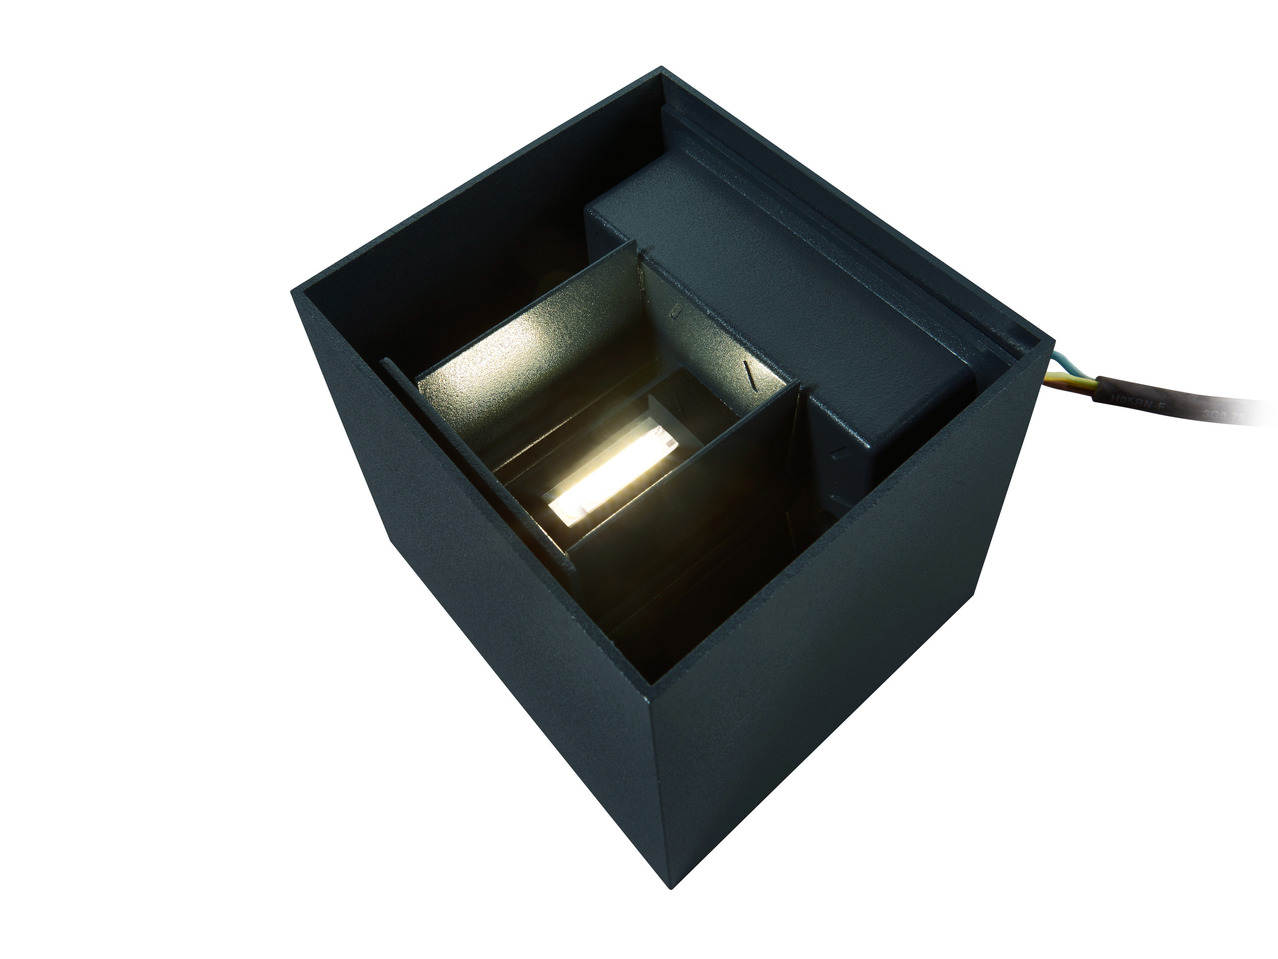 LED Outdoor Up and Down Wall Light